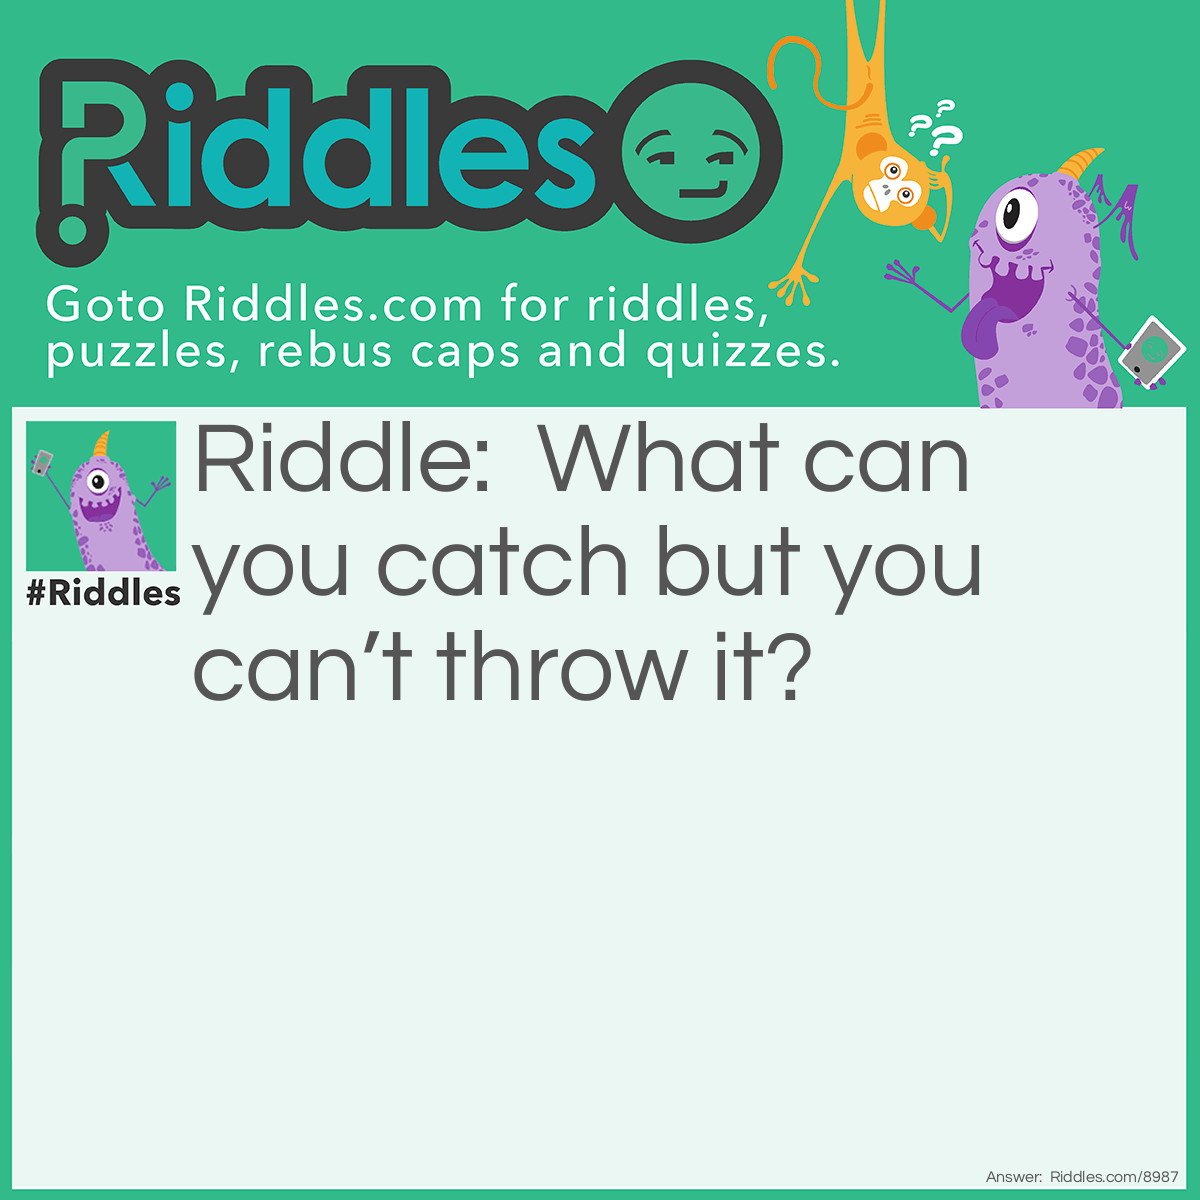 Riddle: What can you catch but you can't throw it? Answer: A cold.